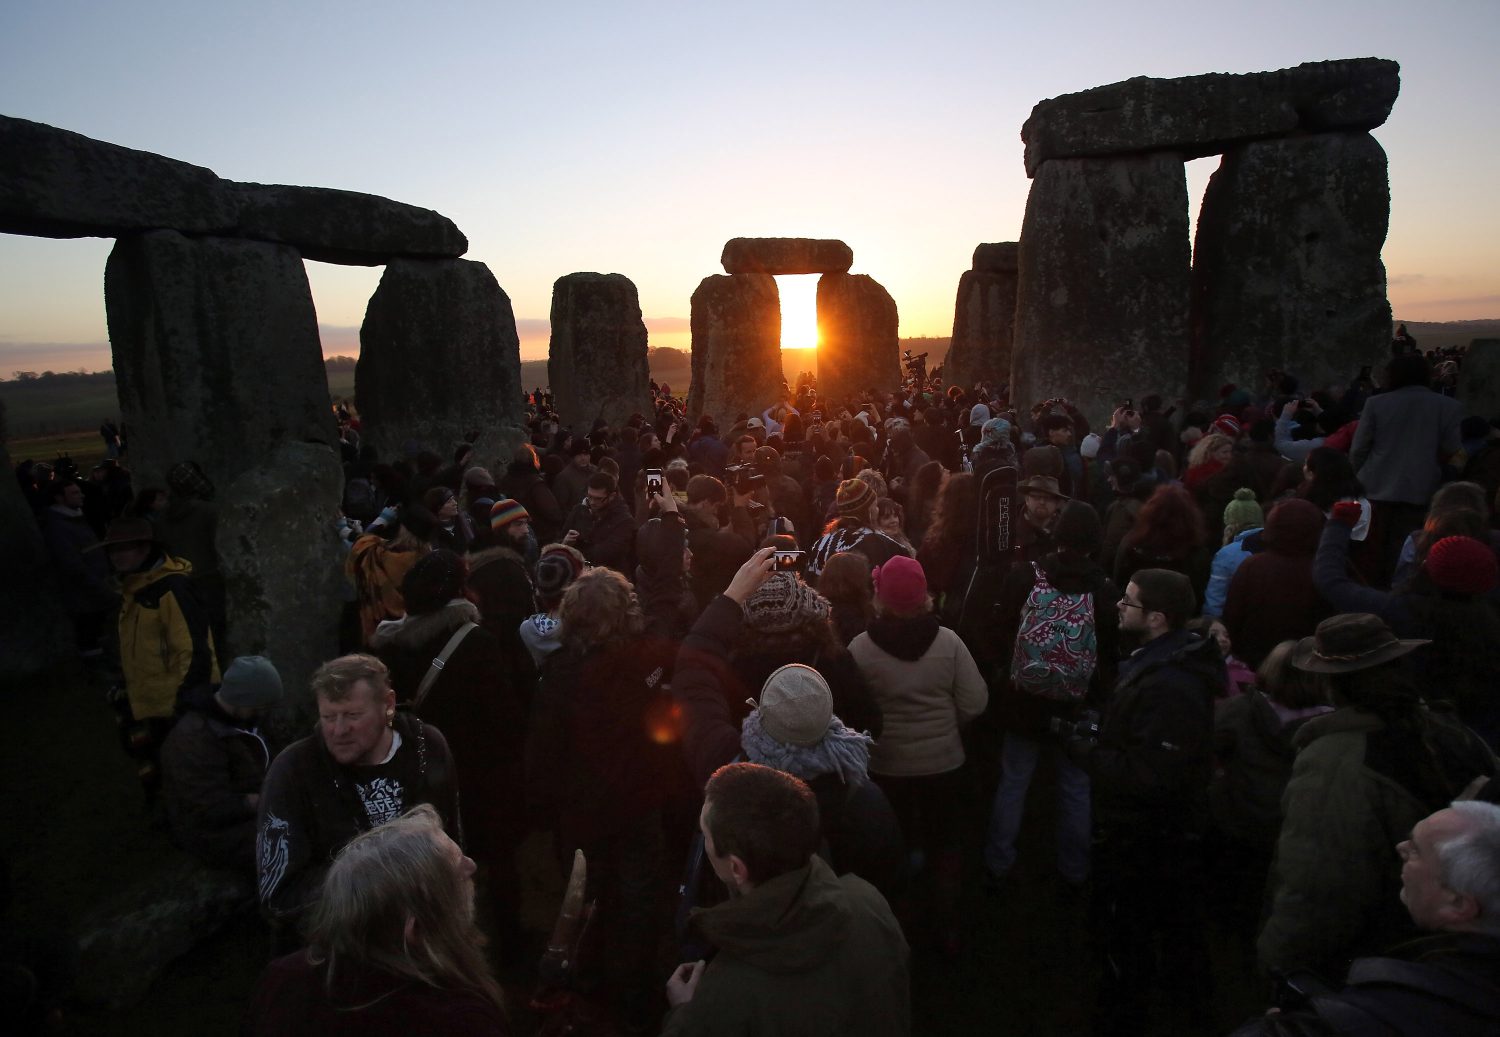 Matt Cardy/Getty Images.AMESBURY, ENGLAND - DECEMBER 21: People gather to watch the sunrise as druids, pagans and revellers celebrate the winter solstice at Stonehenge on December 21, 2012 in Wiltshire, England. Predictions that the world will end today as it marks the end of a 5,125-year-long cycle in the ancient Maya calendar, encouraged a larger than normal crowd to gather at the famous historic stone circle to celebrate the sunrise closest to the Winter Solstice, the shortest day of the year.